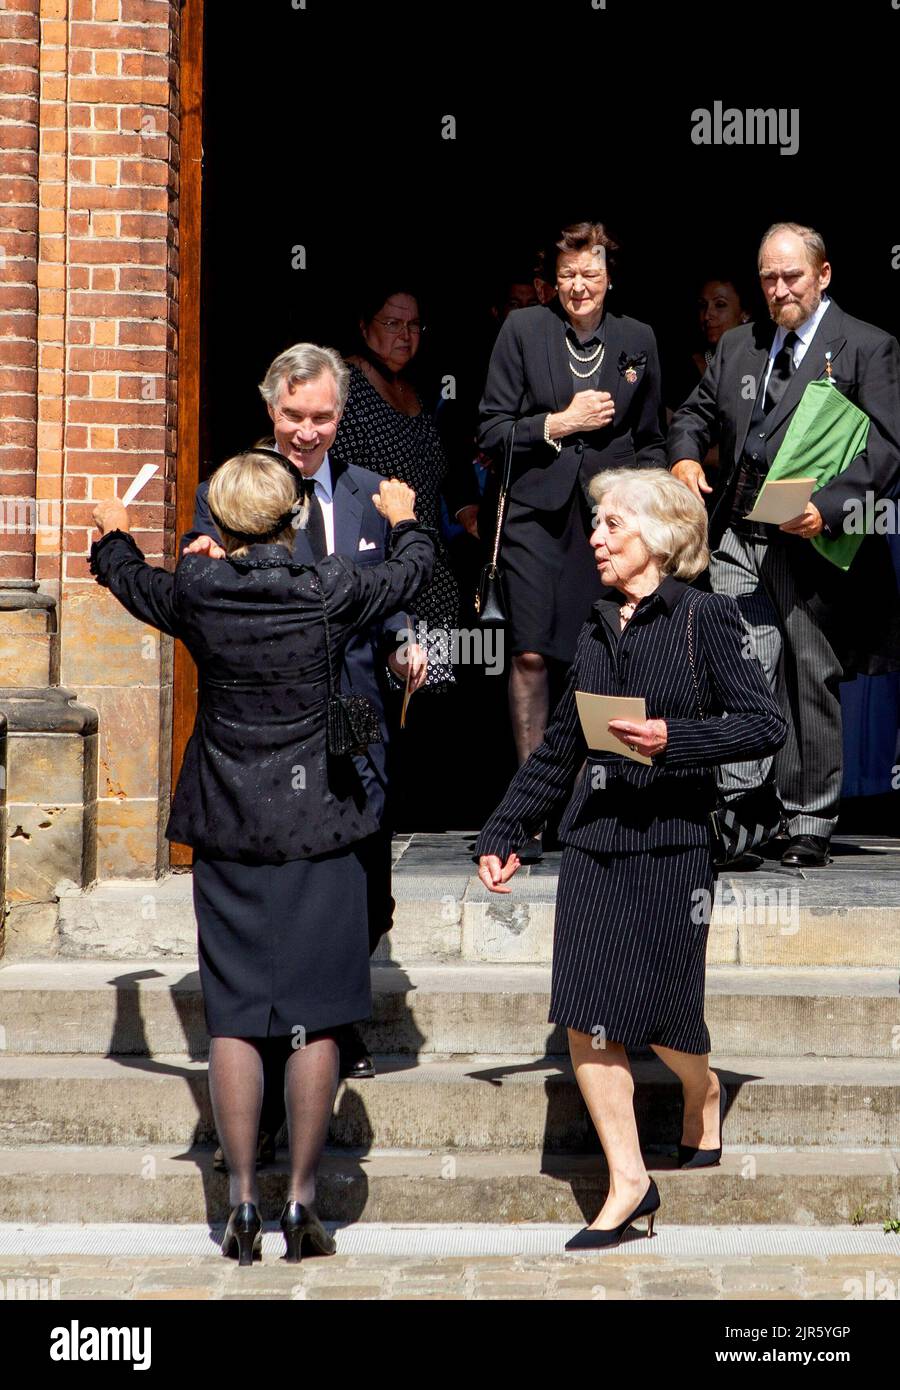 Archduke Rudolph of Austria and Baroness Marie Hélène de Villenfagne de Vogelsanck, Archduchess Marie Astrid of Austria, Prince Guillaume of Luxembourg and Archduchess Anna-Gabriele of Austria leave at the l eglise Saint-Pierre in Belil, on August 22, 2022, after attended the funeral of Prince Wauthier de Ligne (10-07-1952/15-08-2022), he was the First Cousin of the Grand Duke of Luxembourg Photo: Albert Nieboer/Netherlands OUT/Point de Vue OUT Stock Photo